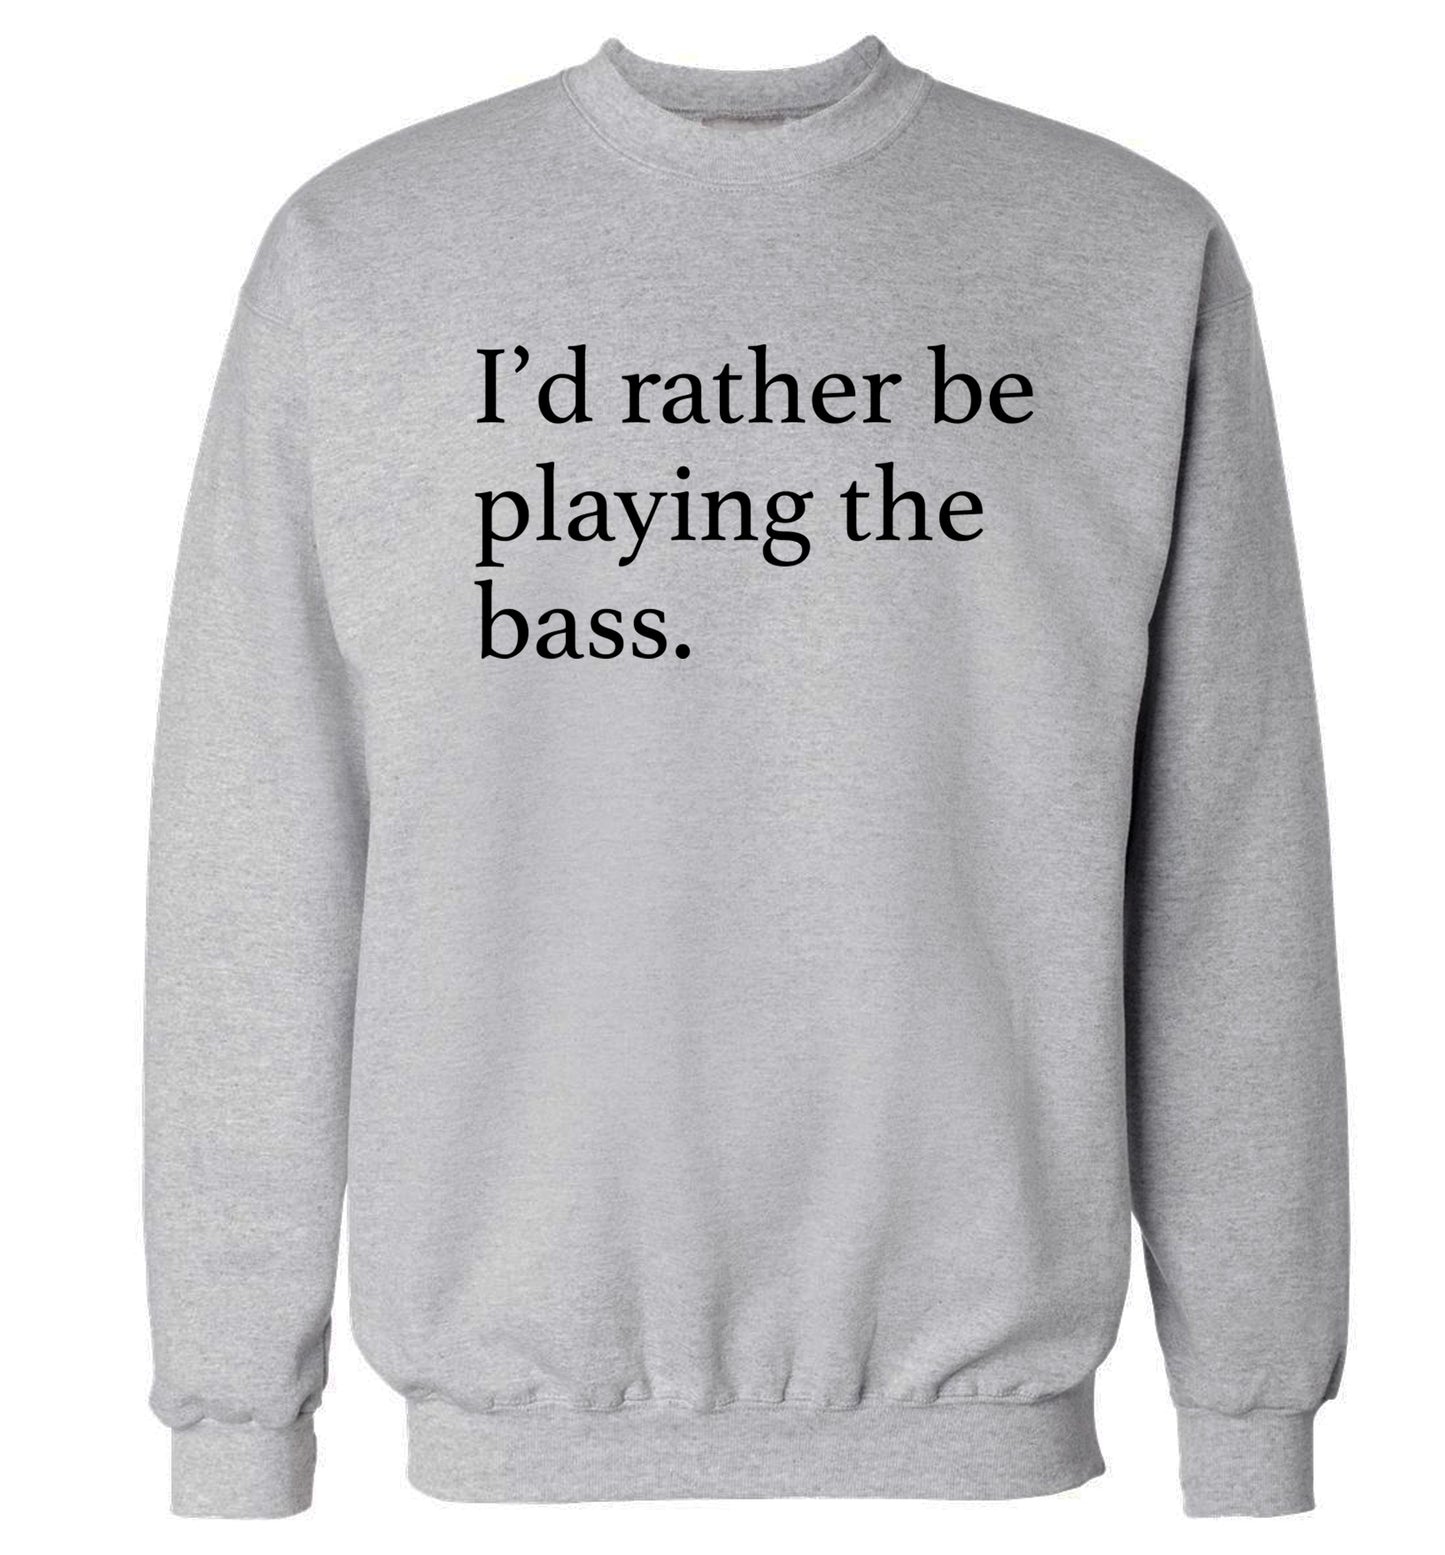 I'd rather by playing the bass Adult's unisex grey Sweater 2XL